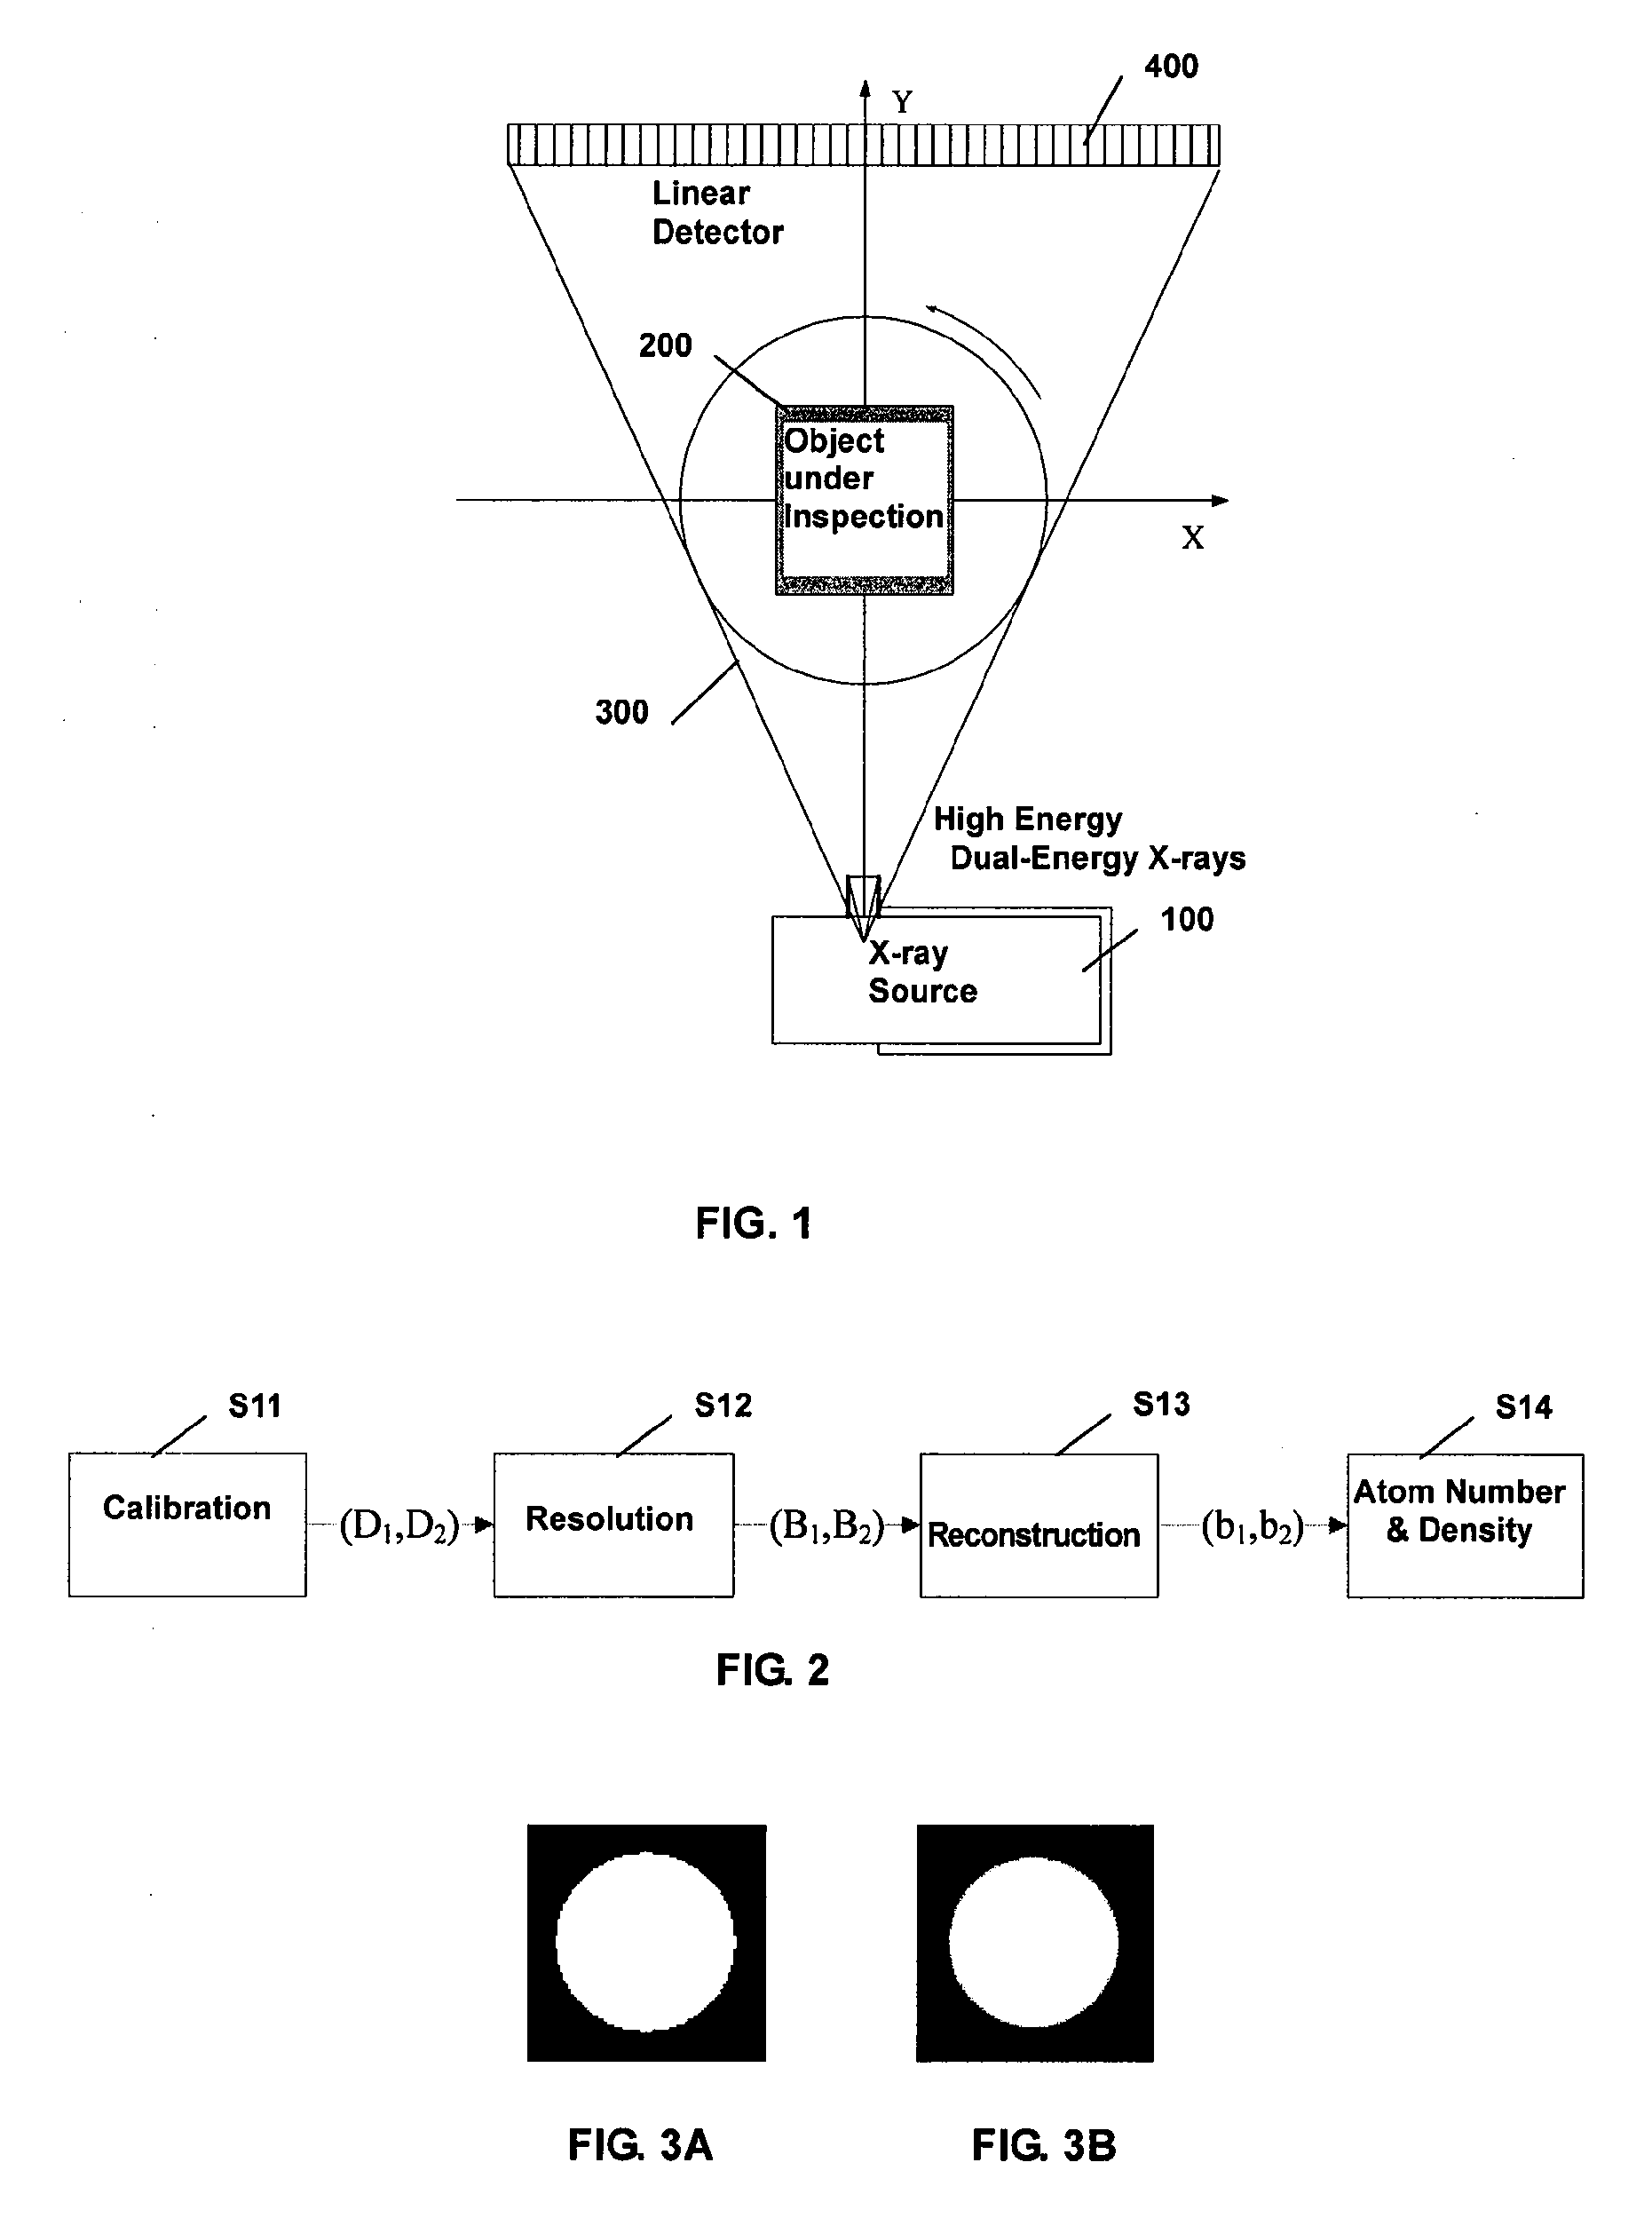 Image reconstruction method for high-energy, dual-energy CT system